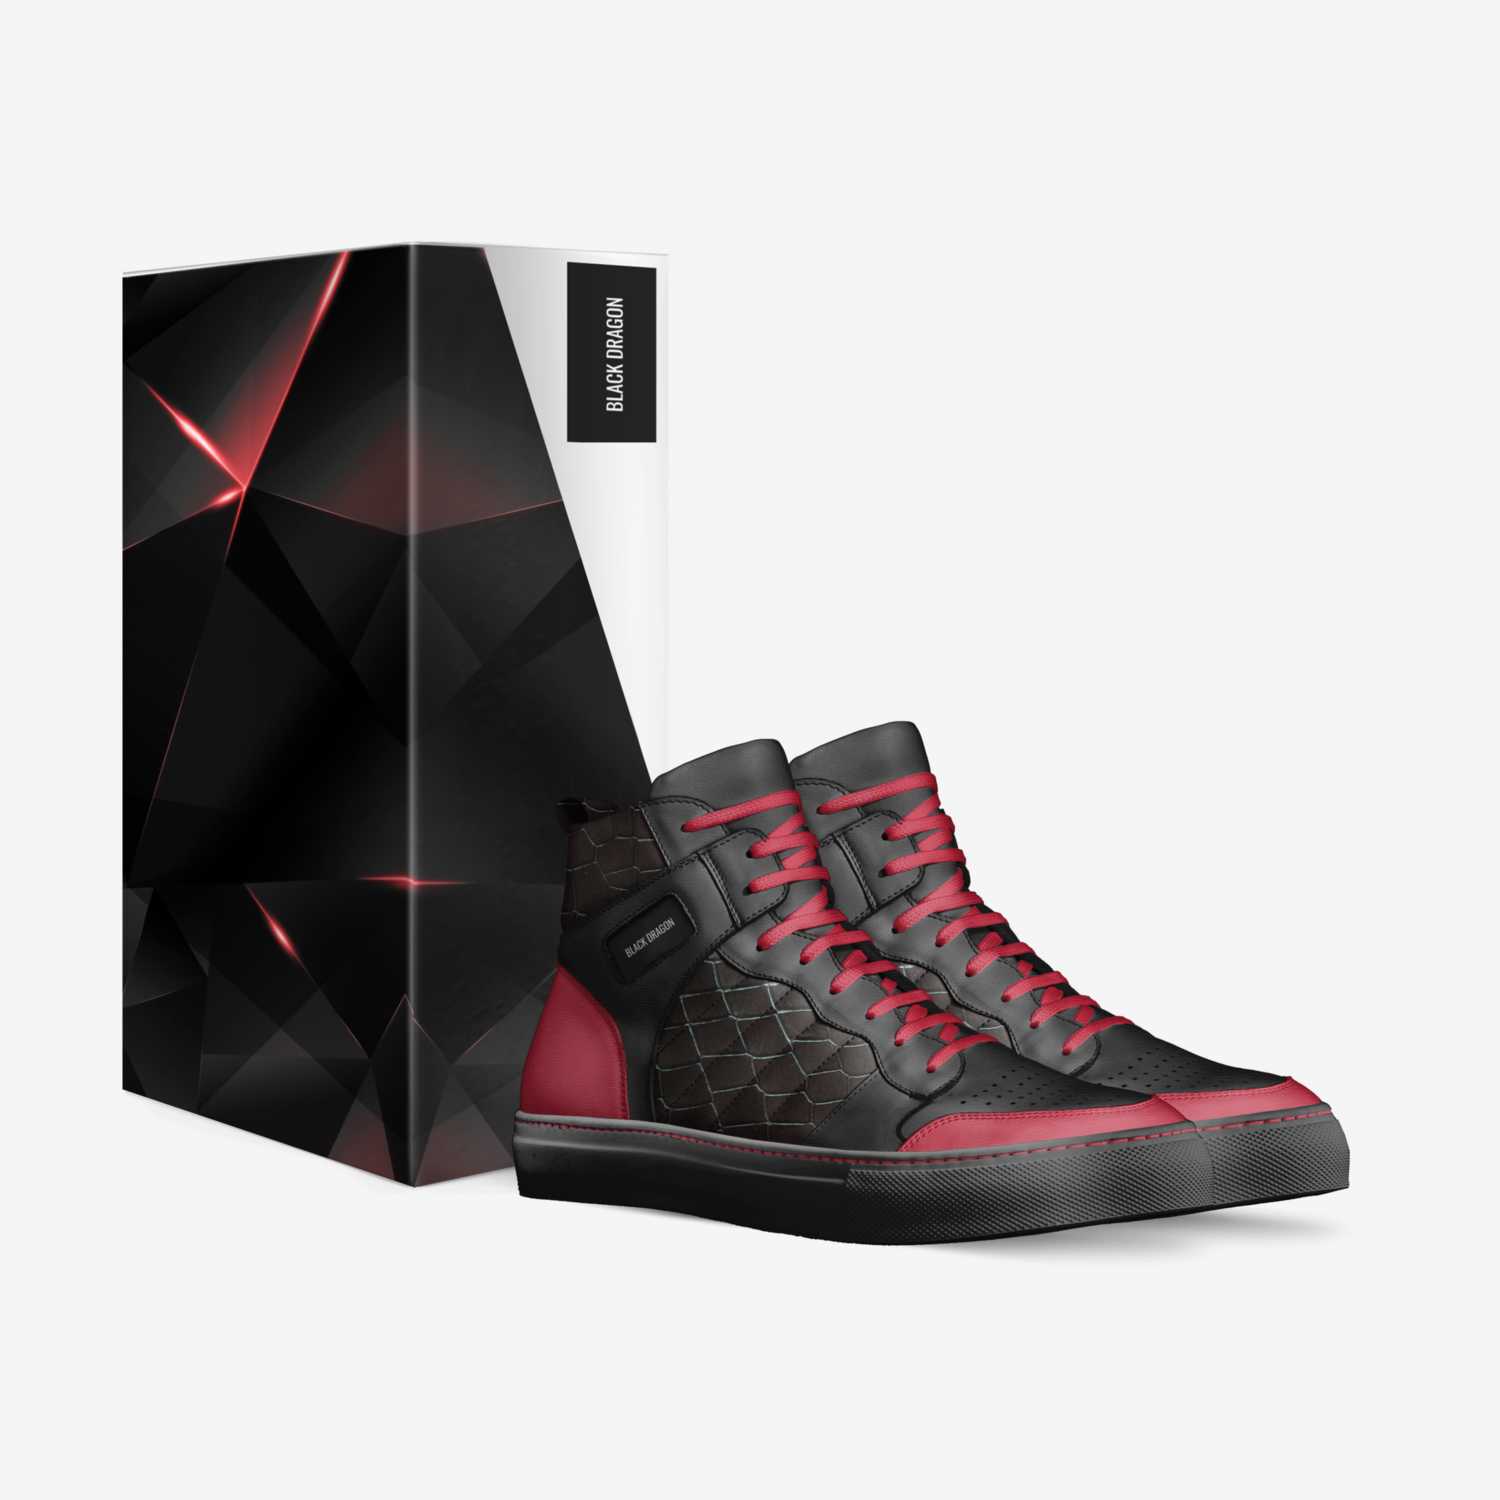 Black Dragon custom made in Italy shoes by Matthew Ulisse | Box view